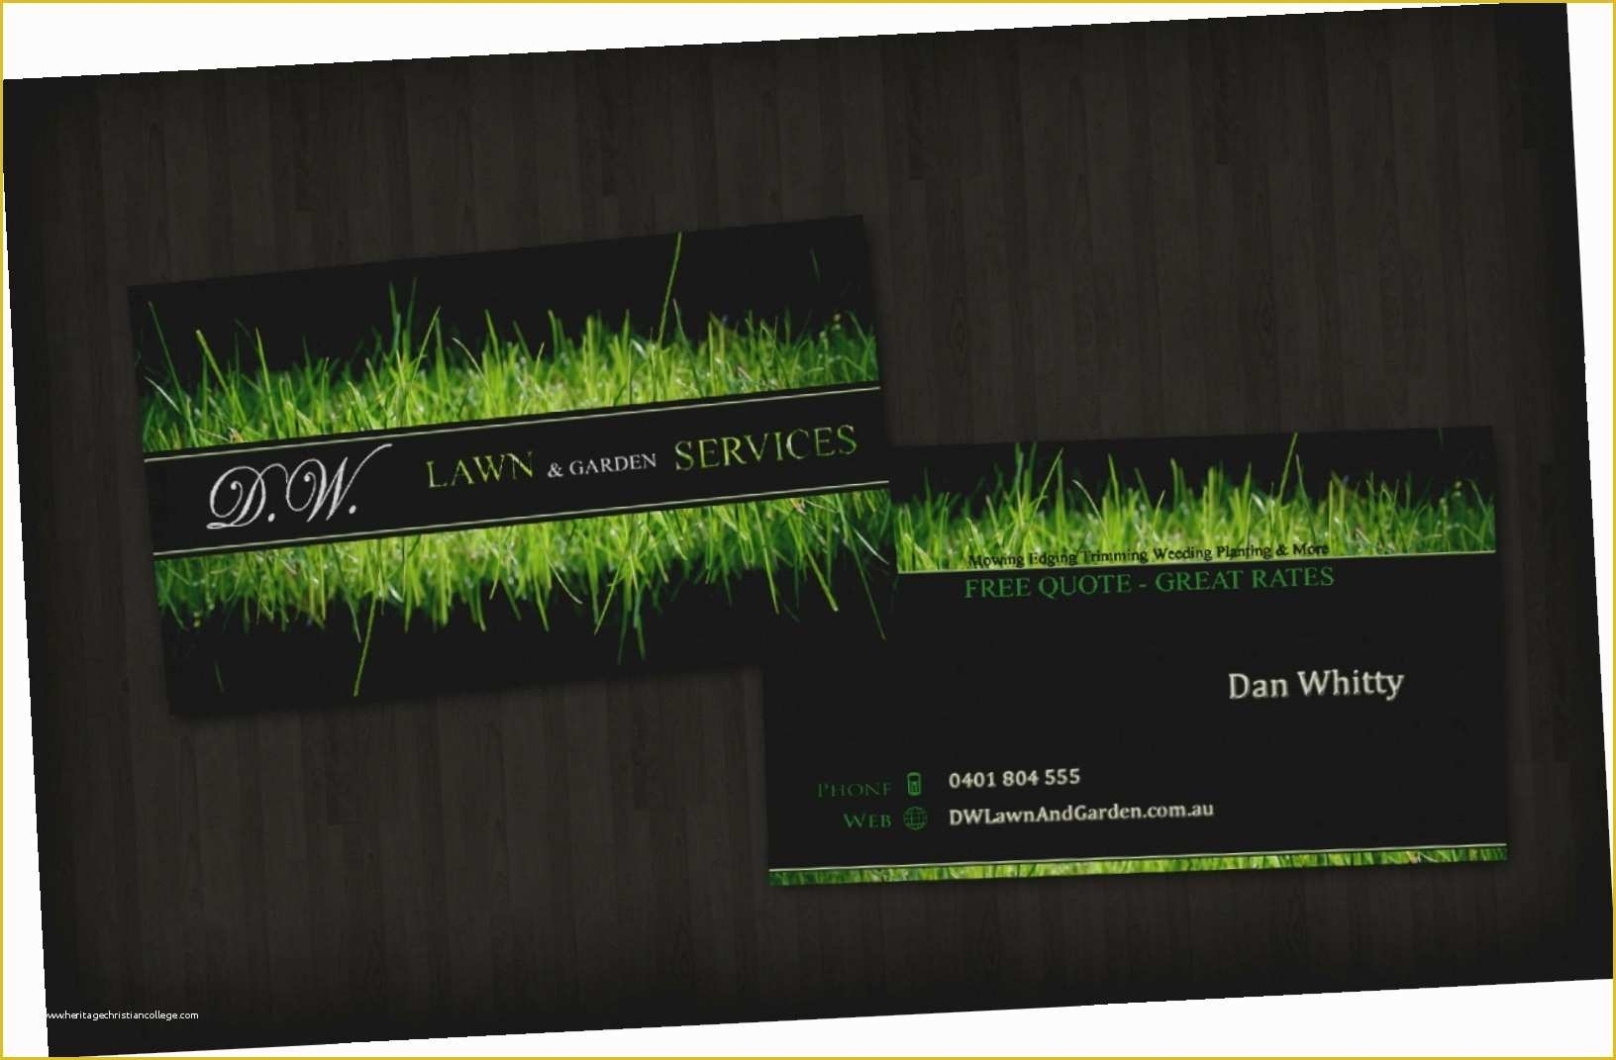 Lawn Care Business Card Templates Free Downloads Of Lawn Care Business Cards O9Ch Lawn Care Throughout Landscaping Business Card Template